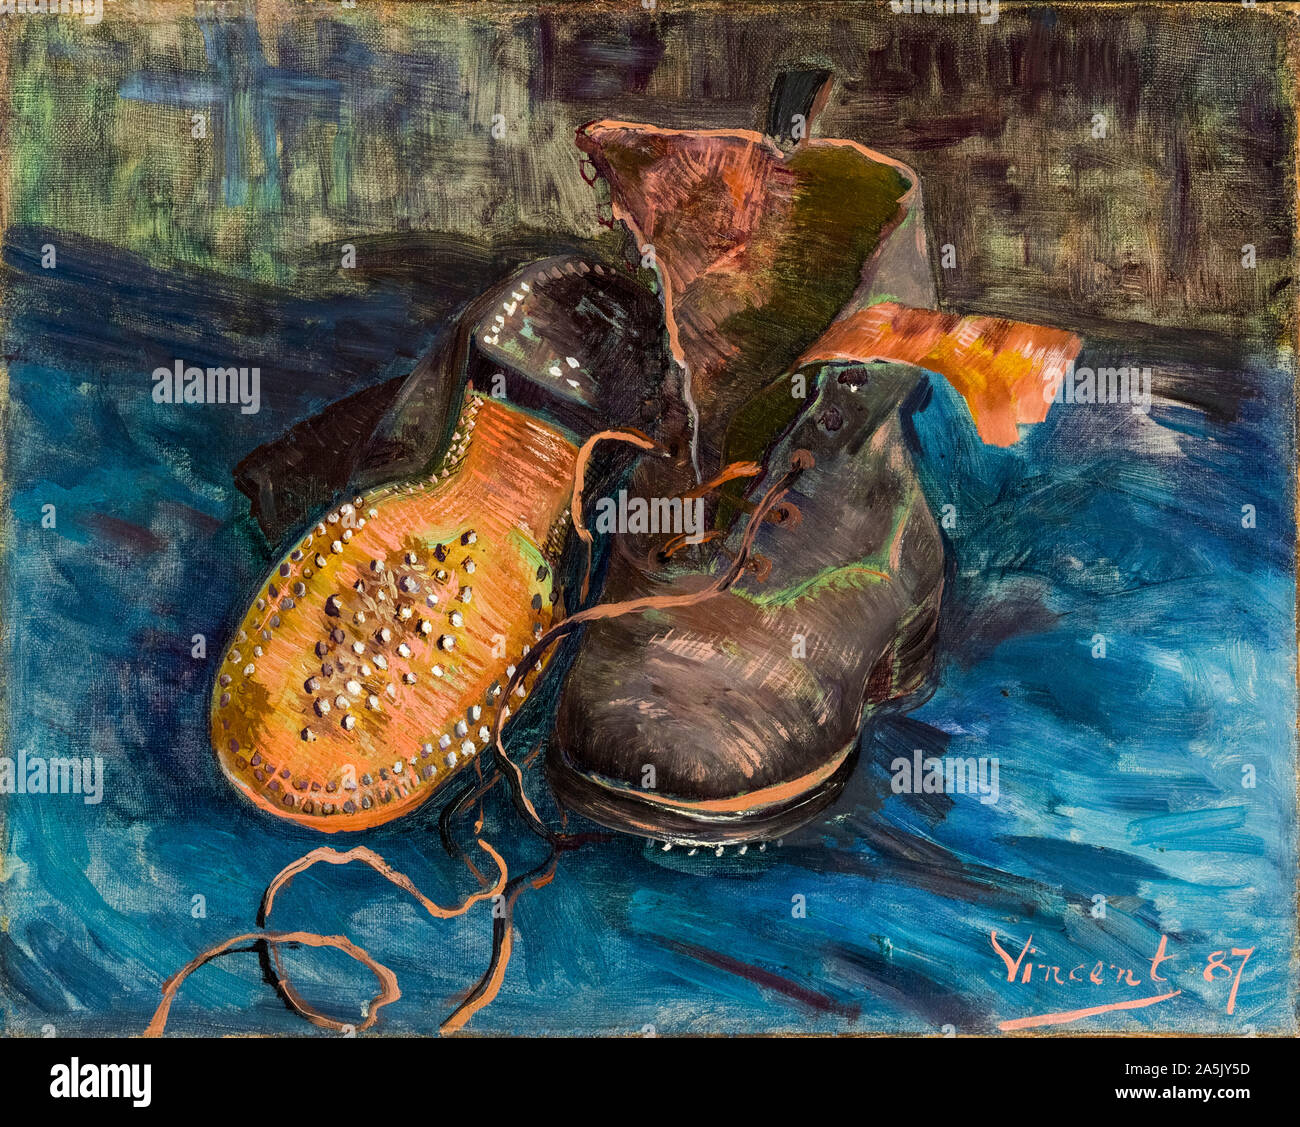 Vincent van Gogh, A Pair of Boots, still life painting, 1887 Stock Photo -  Alamy